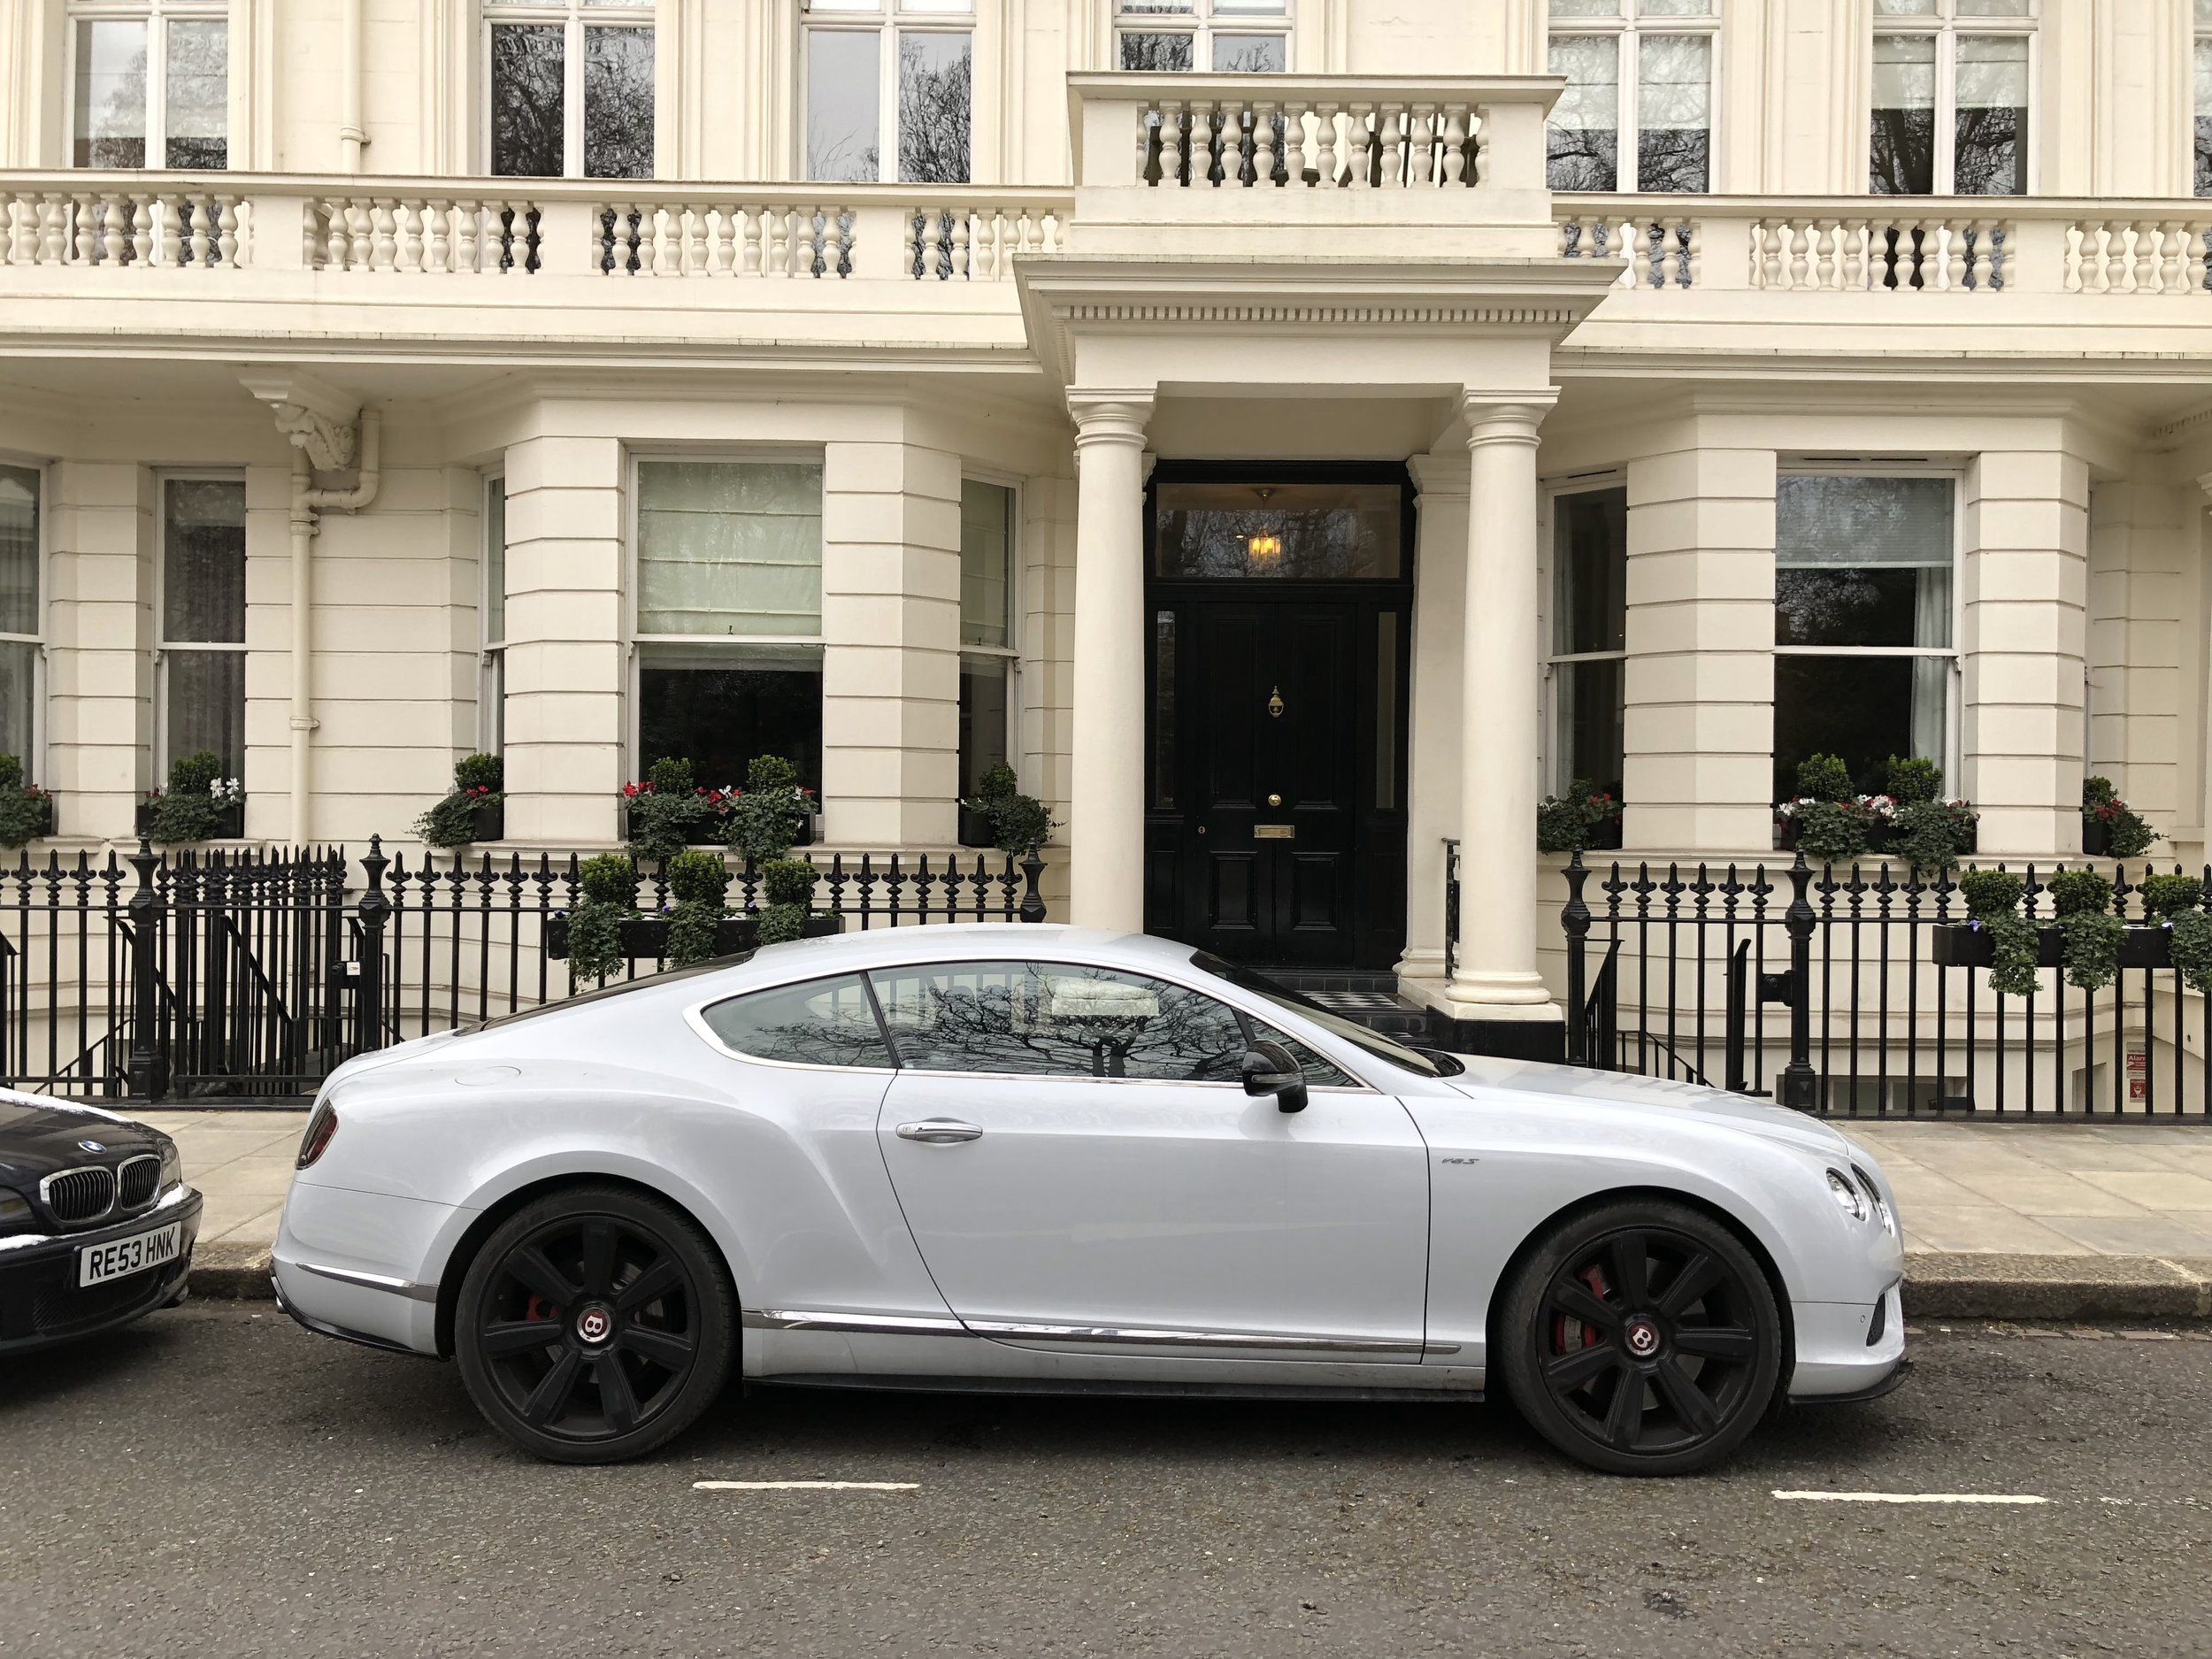 Bentley in front of a townhouse in South Kensington